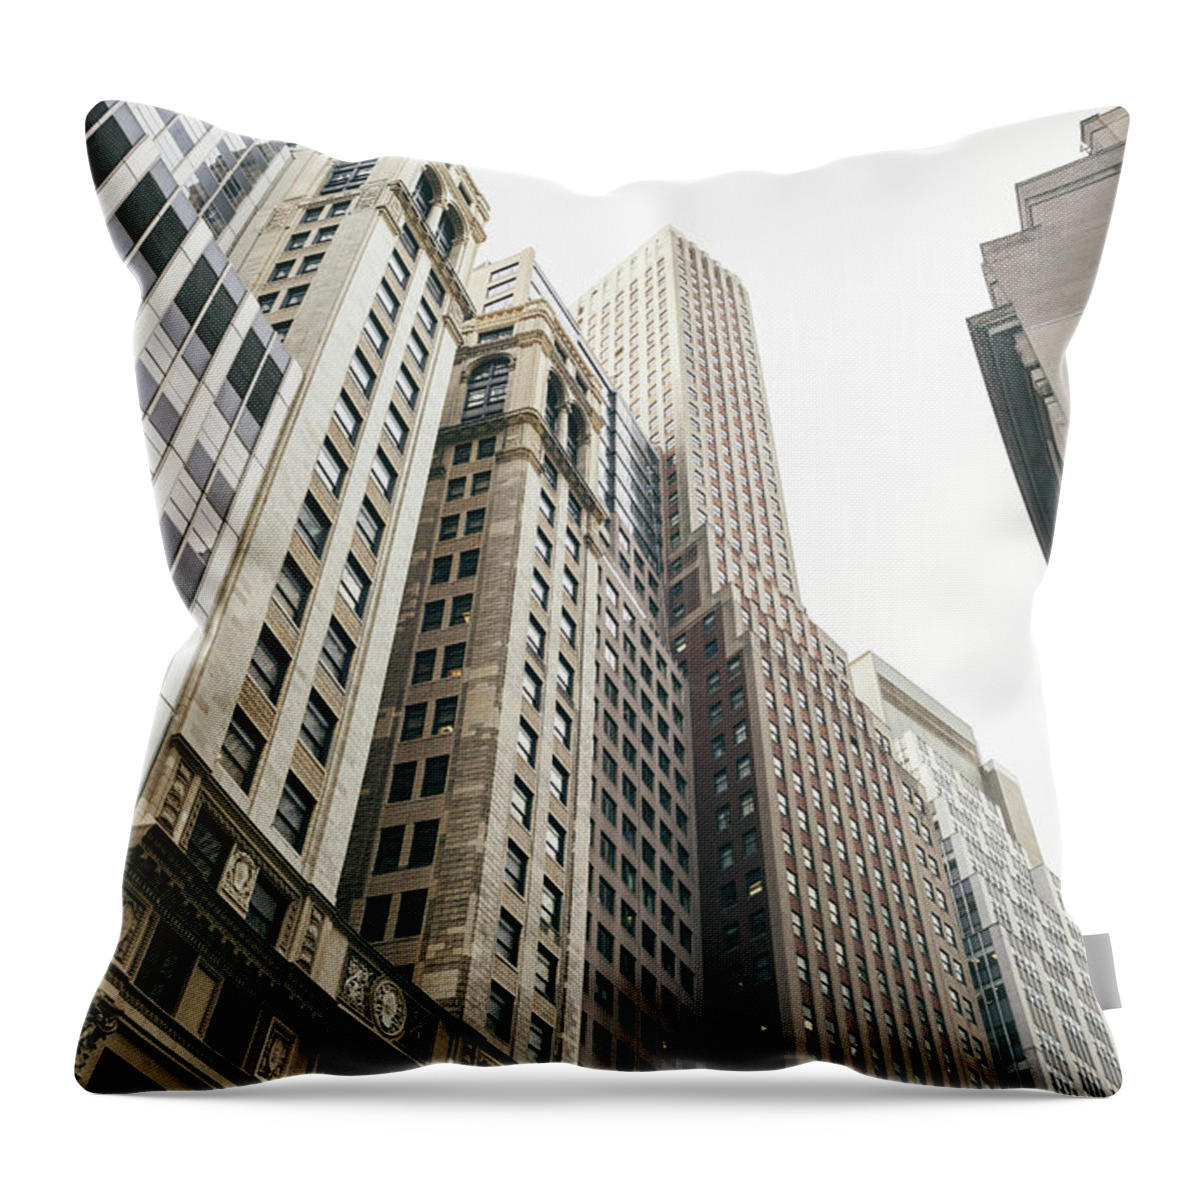 Tranquility Throw Pillow featuring the photograph Financial District, New York City by Tuan Tran